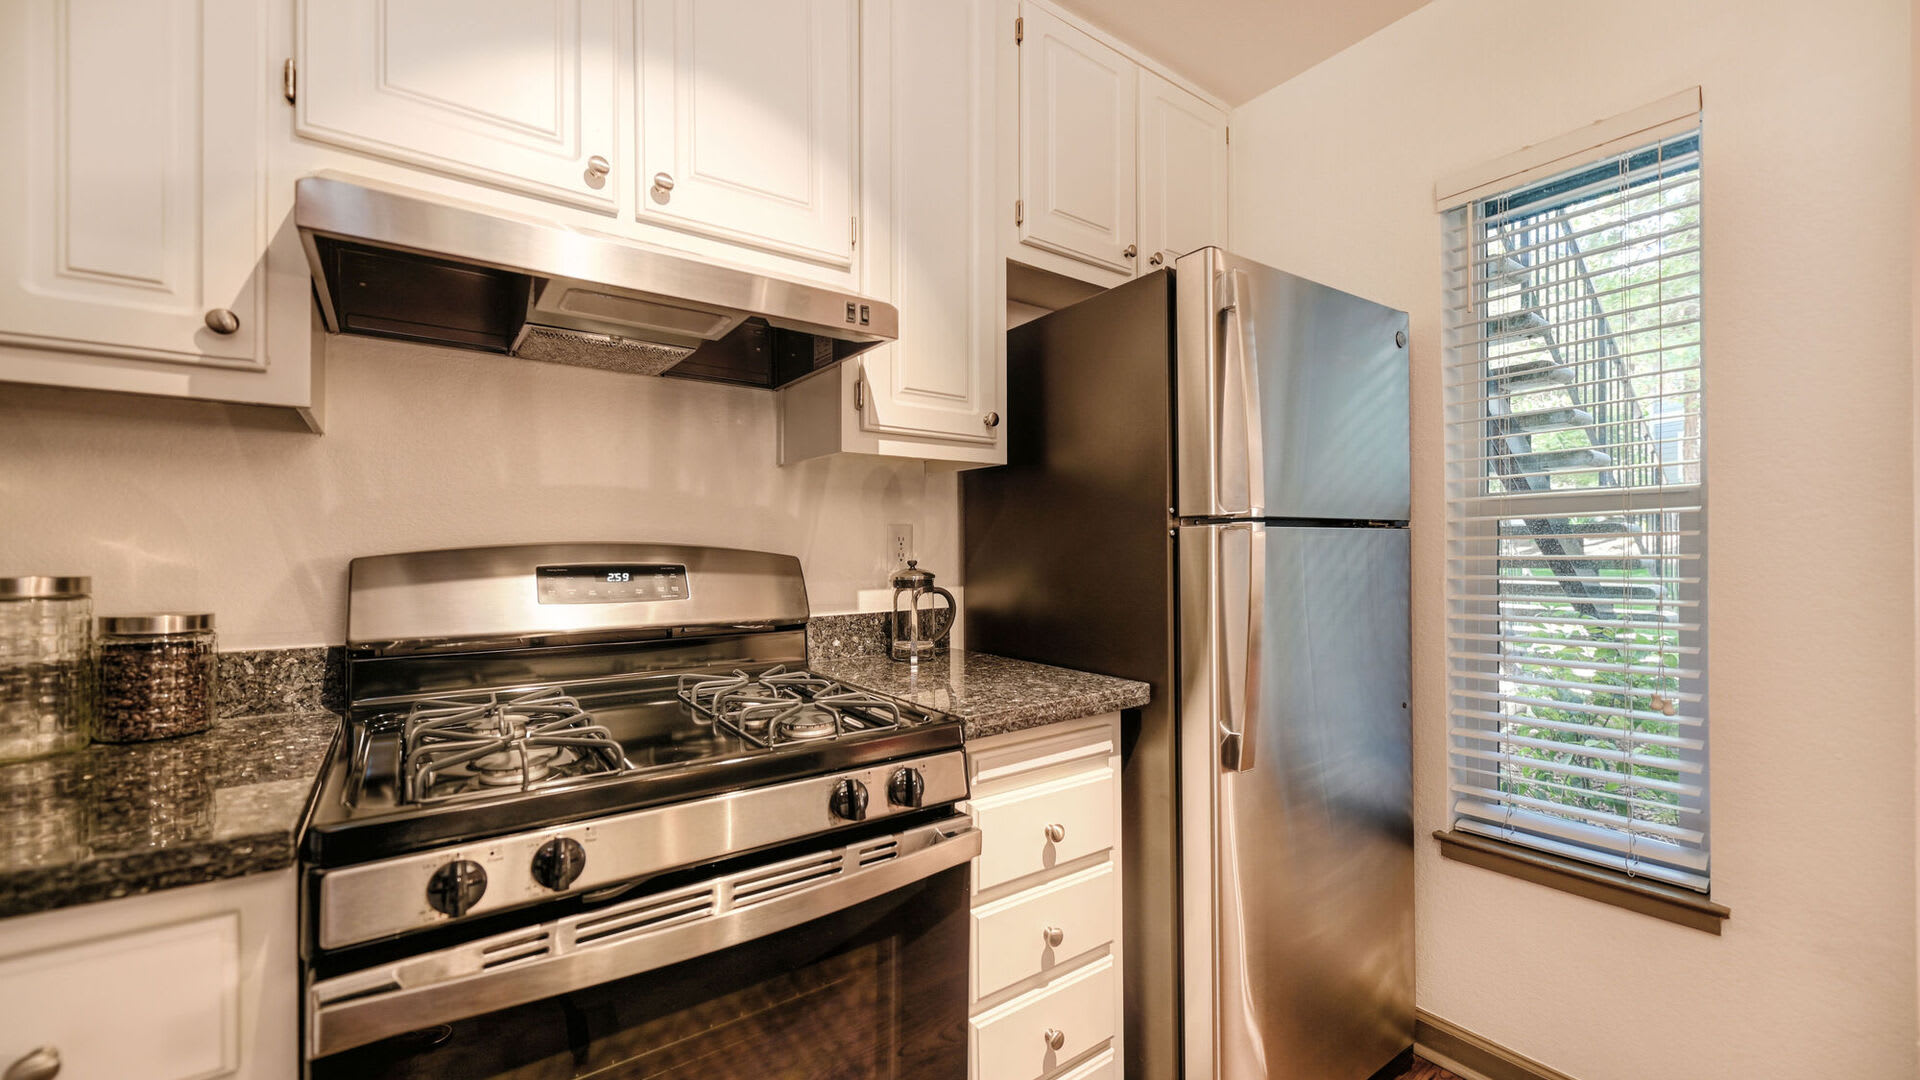 Upgraded kitchen at Lake Pointe Apartments in Folsom, California